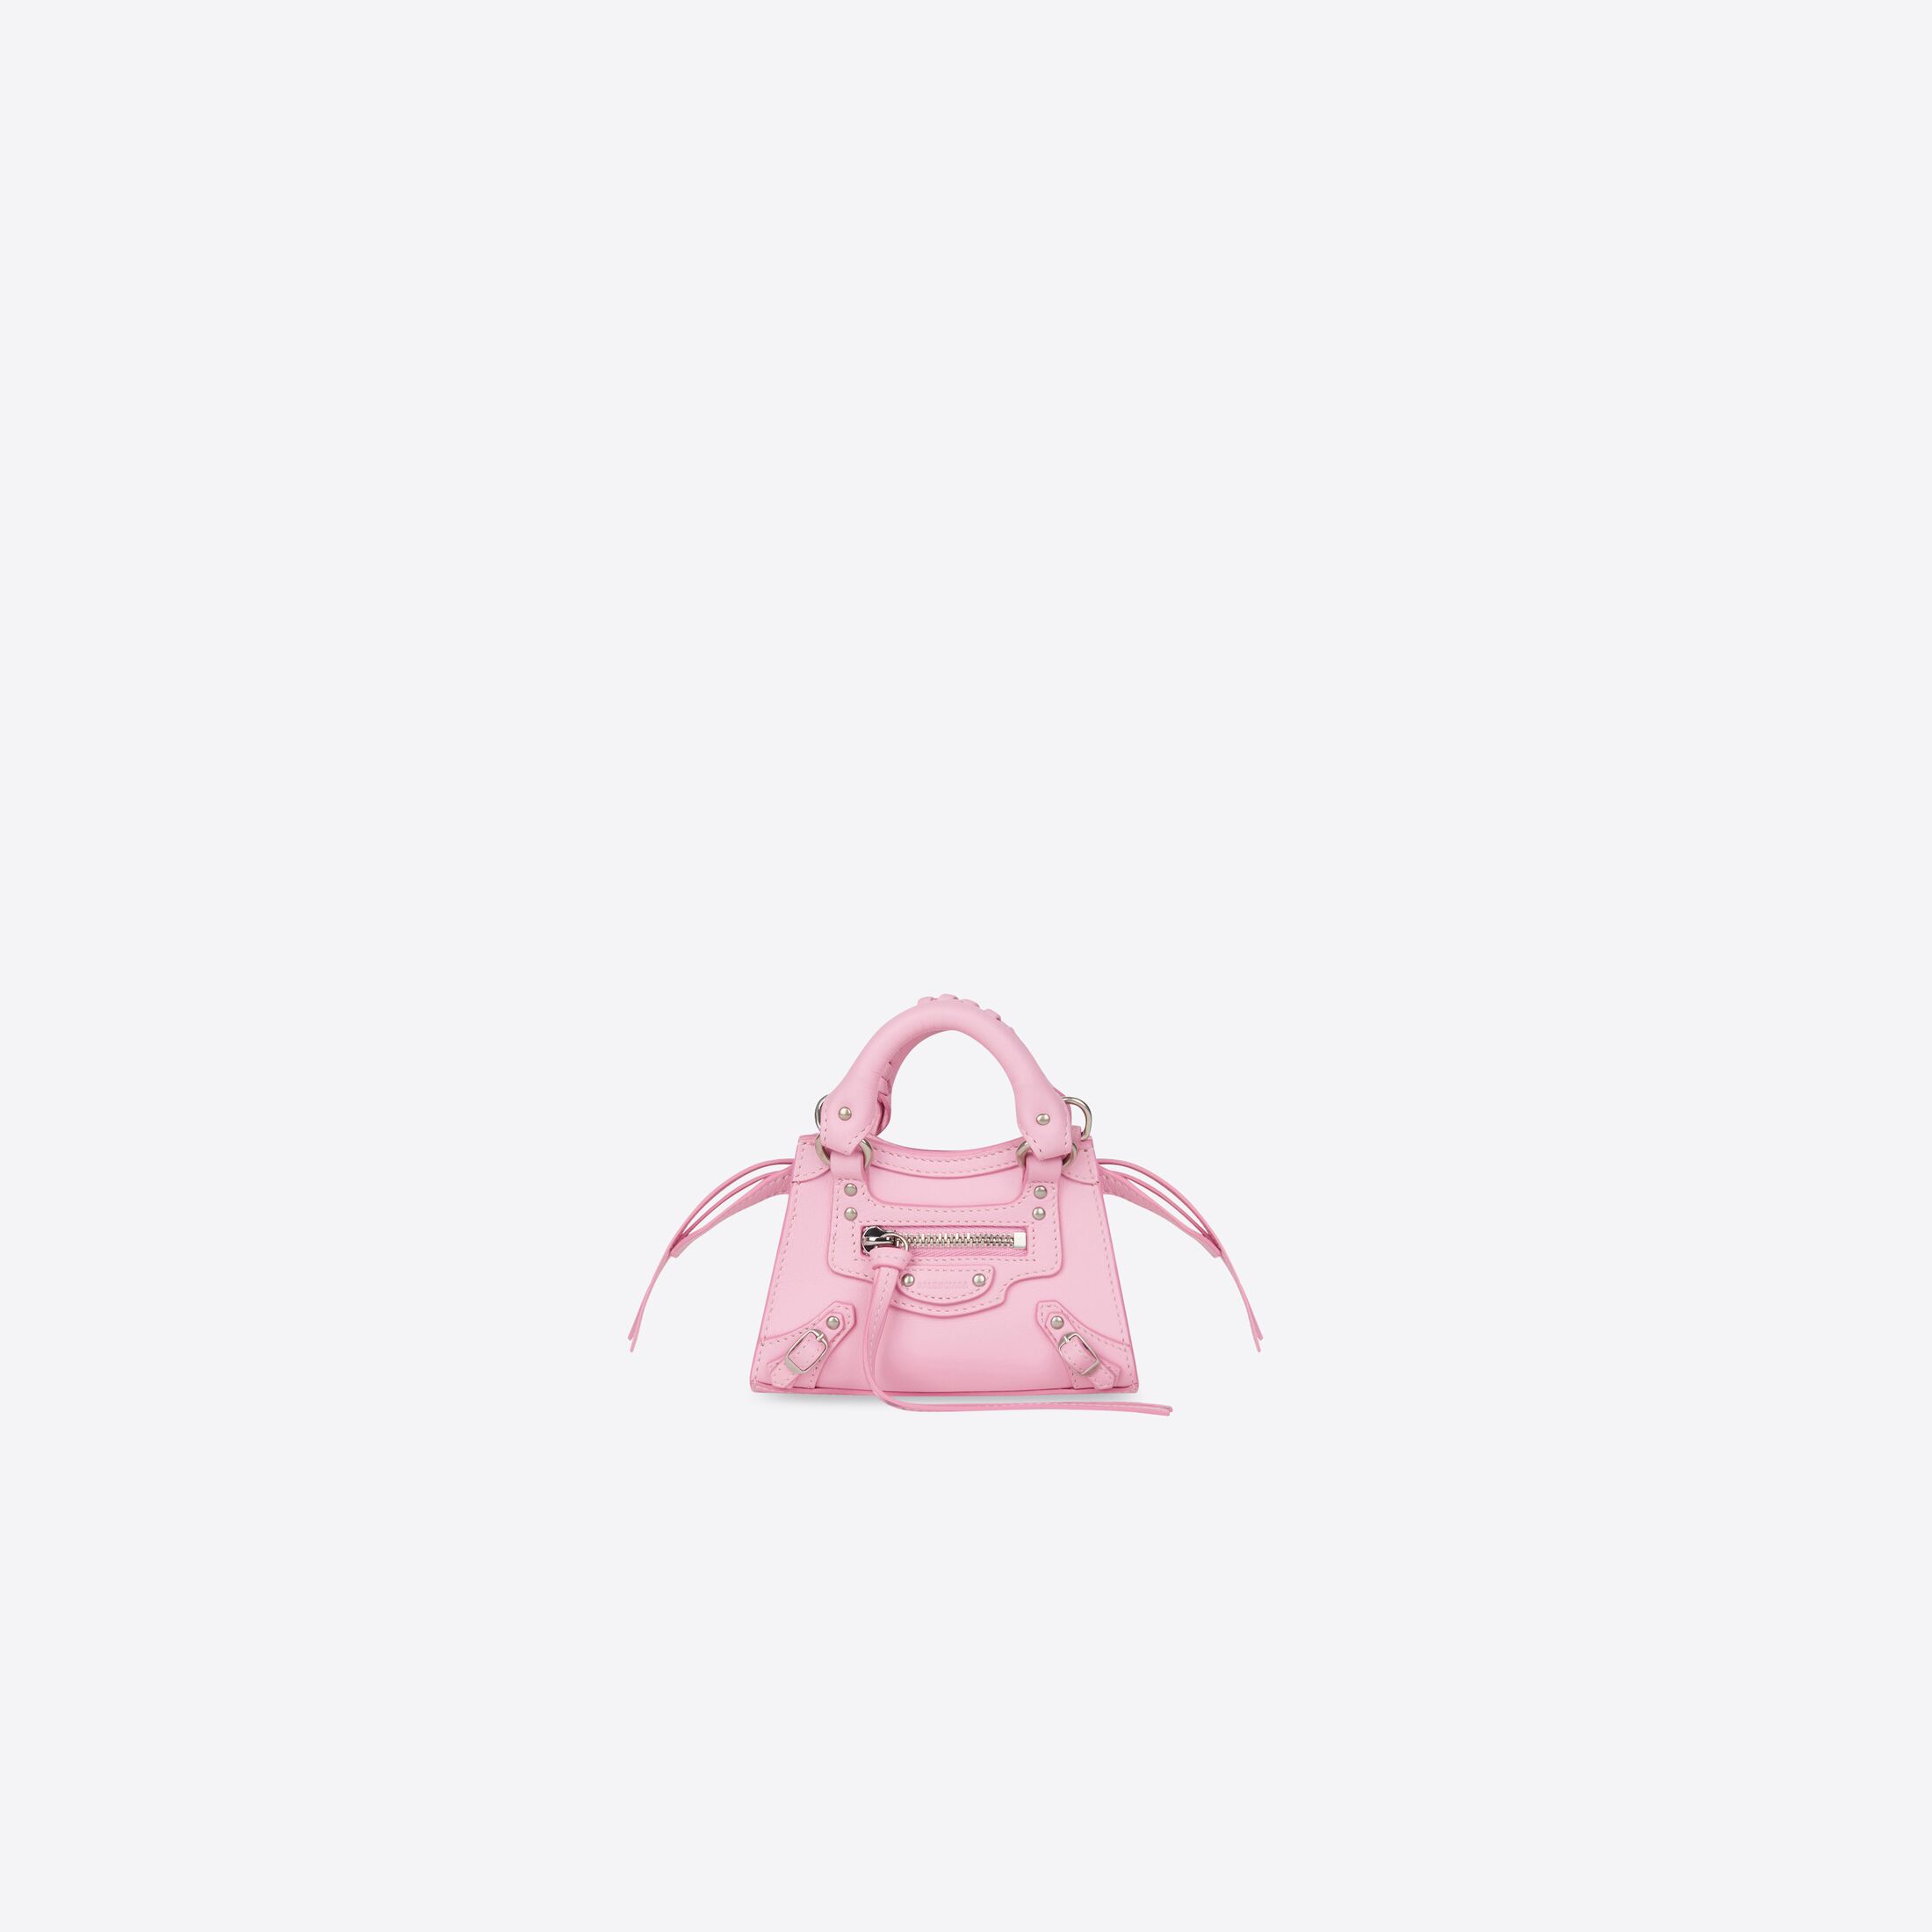 Women's Neo Classic Super Nano Top Handle Bag in Candy Pink